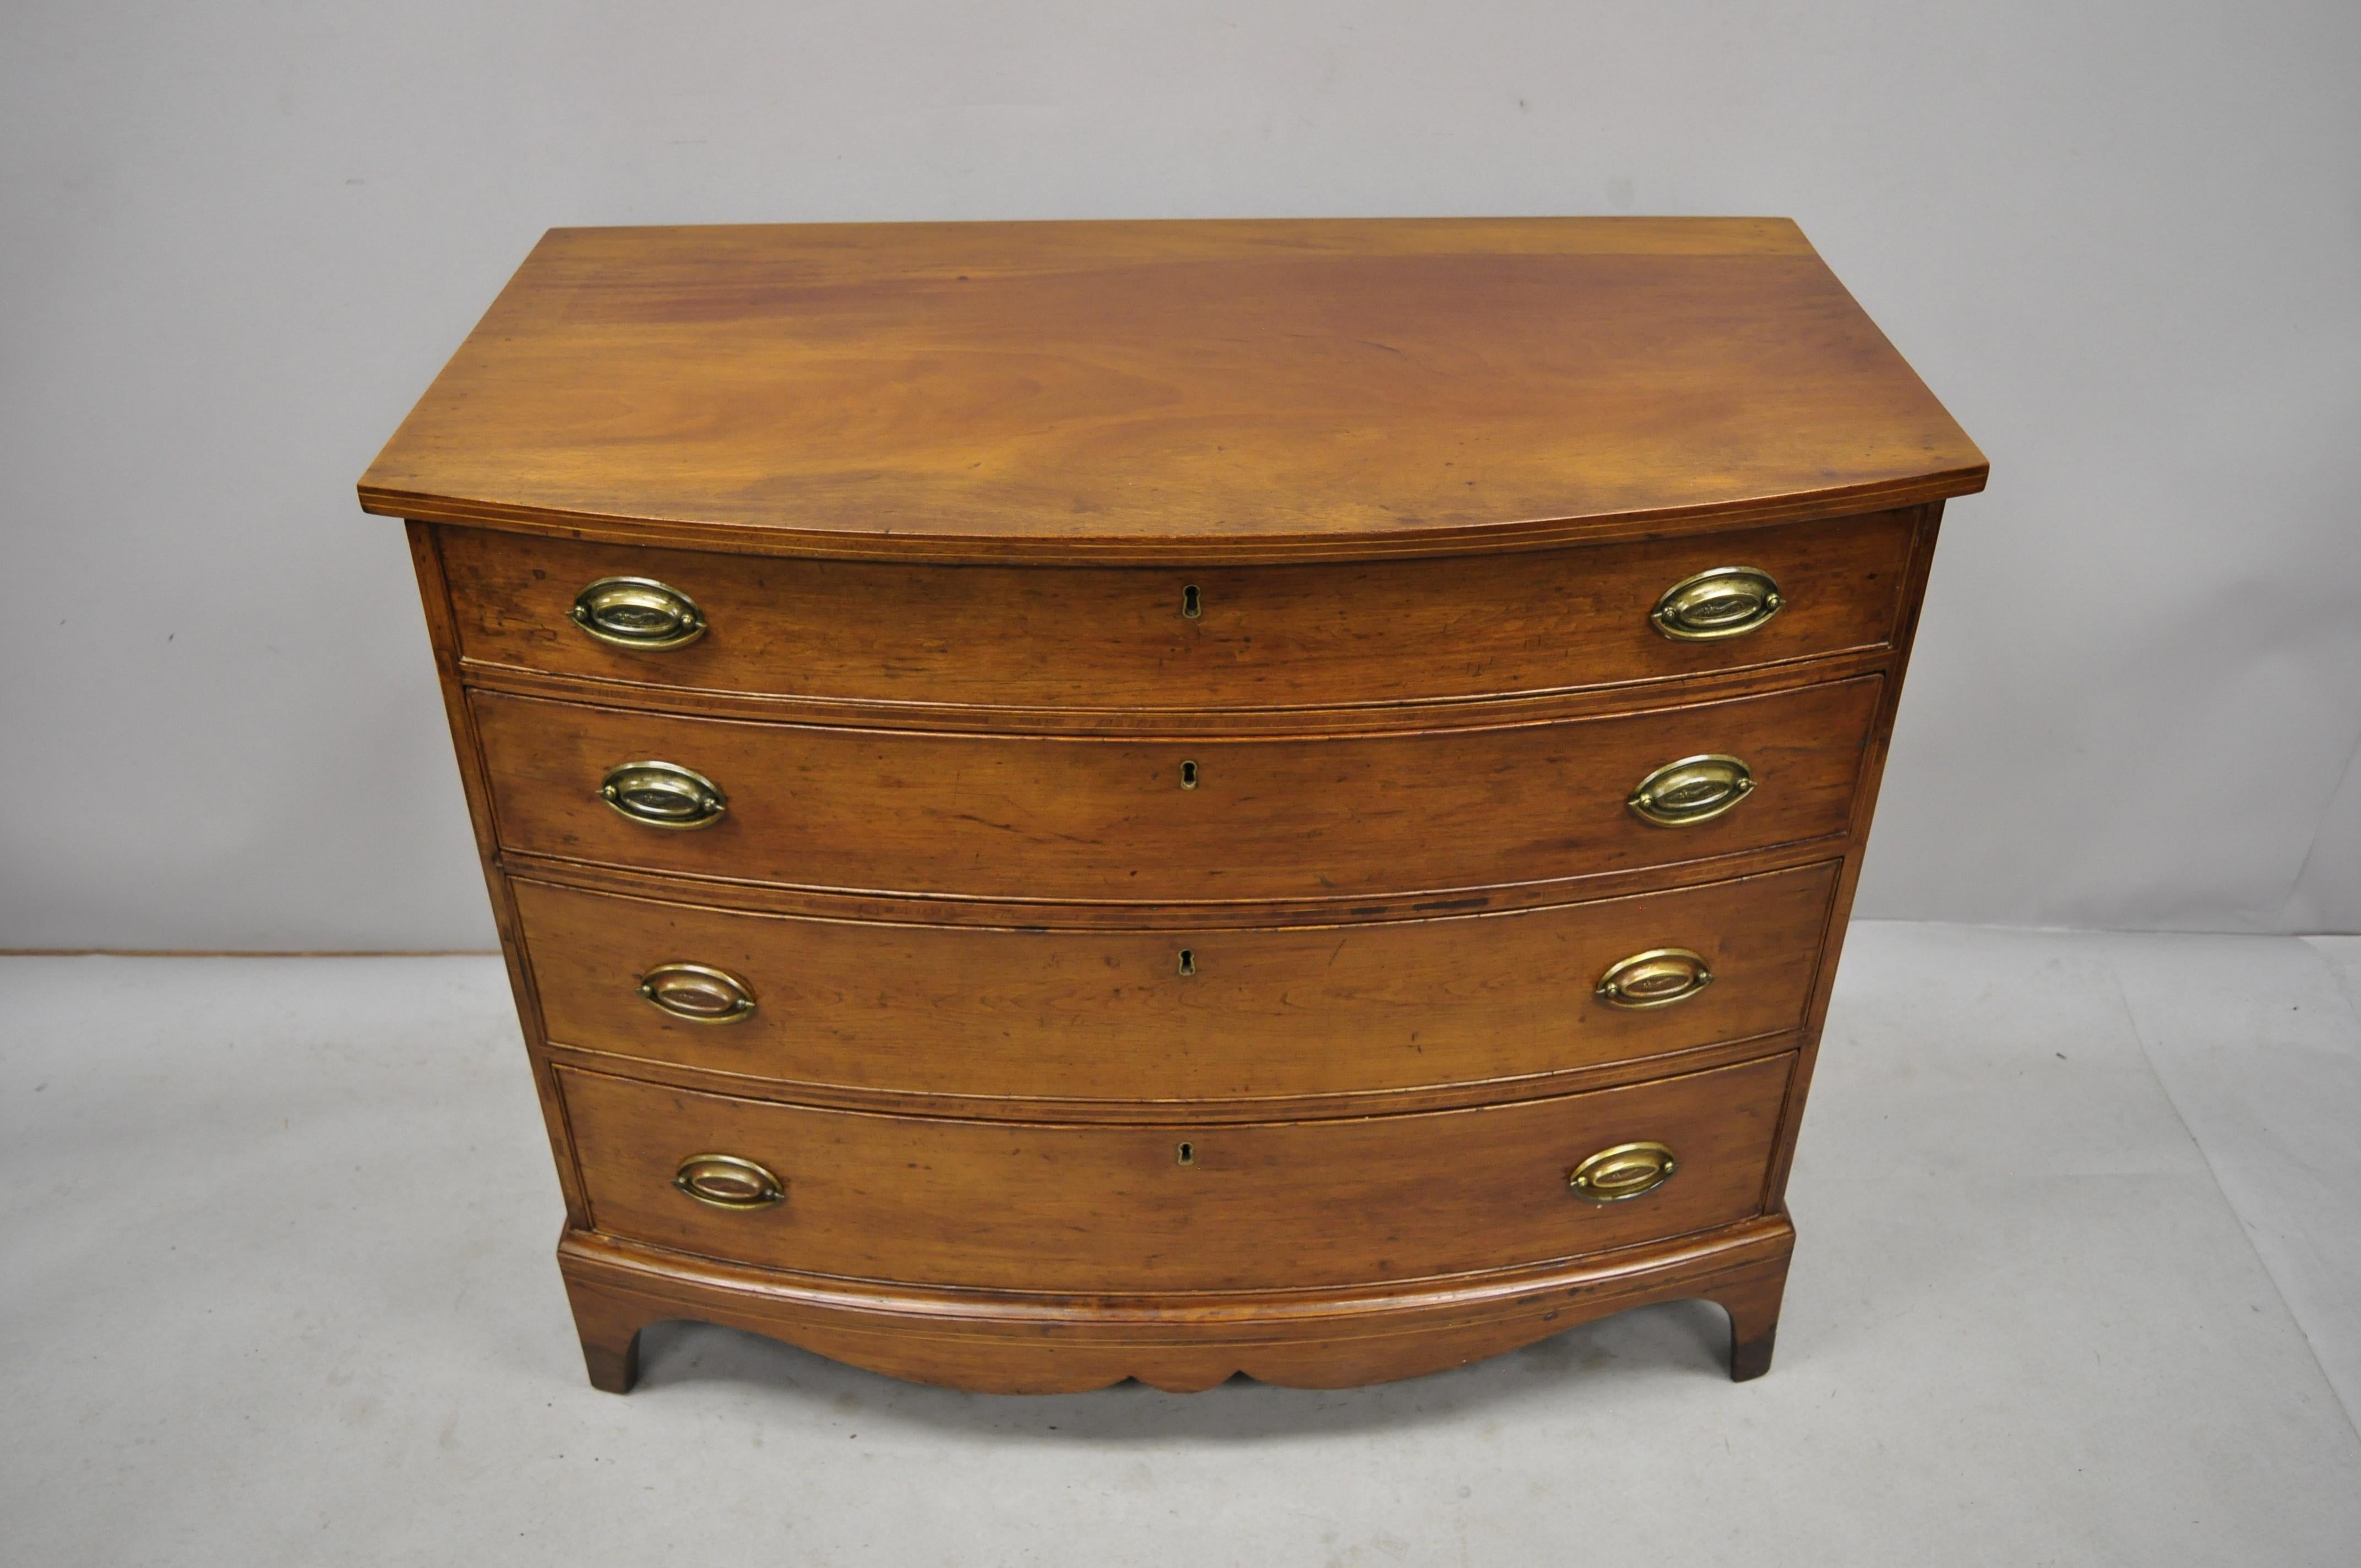 Antique 19th century Hepplewhite bow front mahogany English chest of drawers dresser. Listing includes a serpentine carved skirt, bow front, satinwood pencil inlay, remarkable patina, beautiful wood grain, no key, but unlocked, 4 dovetailed drawers,